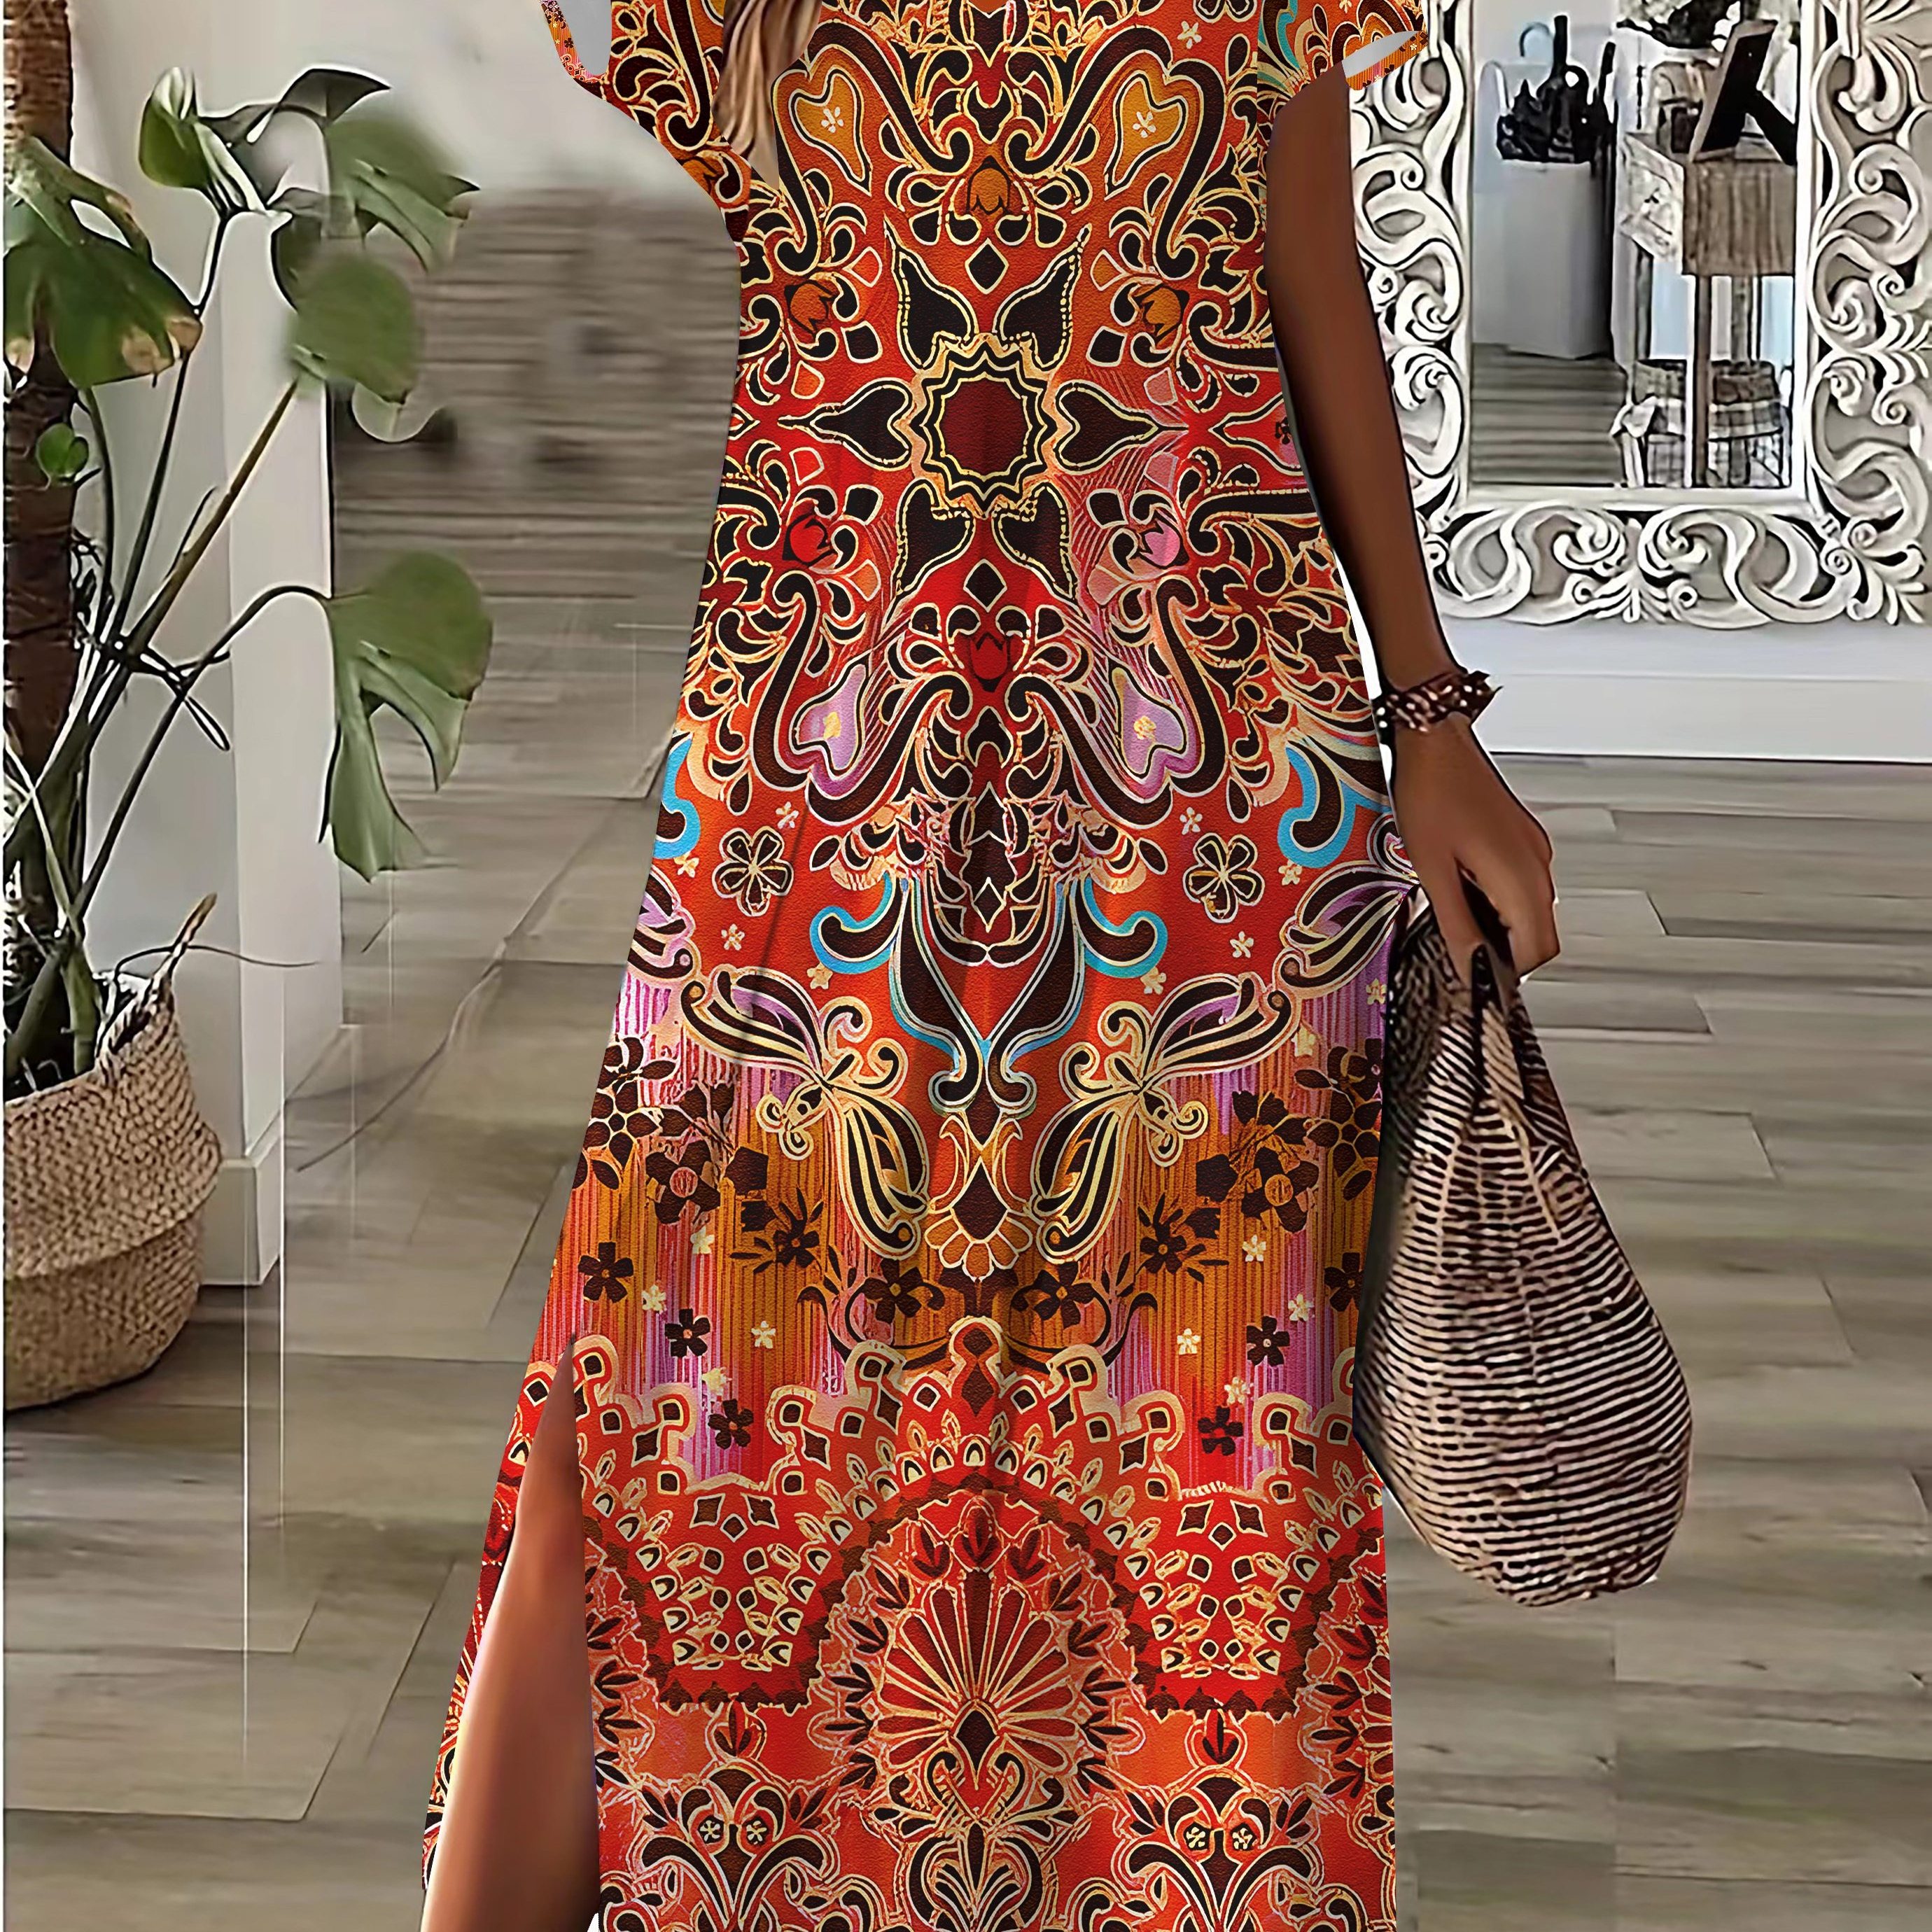 

Plus Size Ethnic Floral Print Slit Dress, Casual Short Sleeve Dress For Spring & Summer, Women's Plus Size Clothing